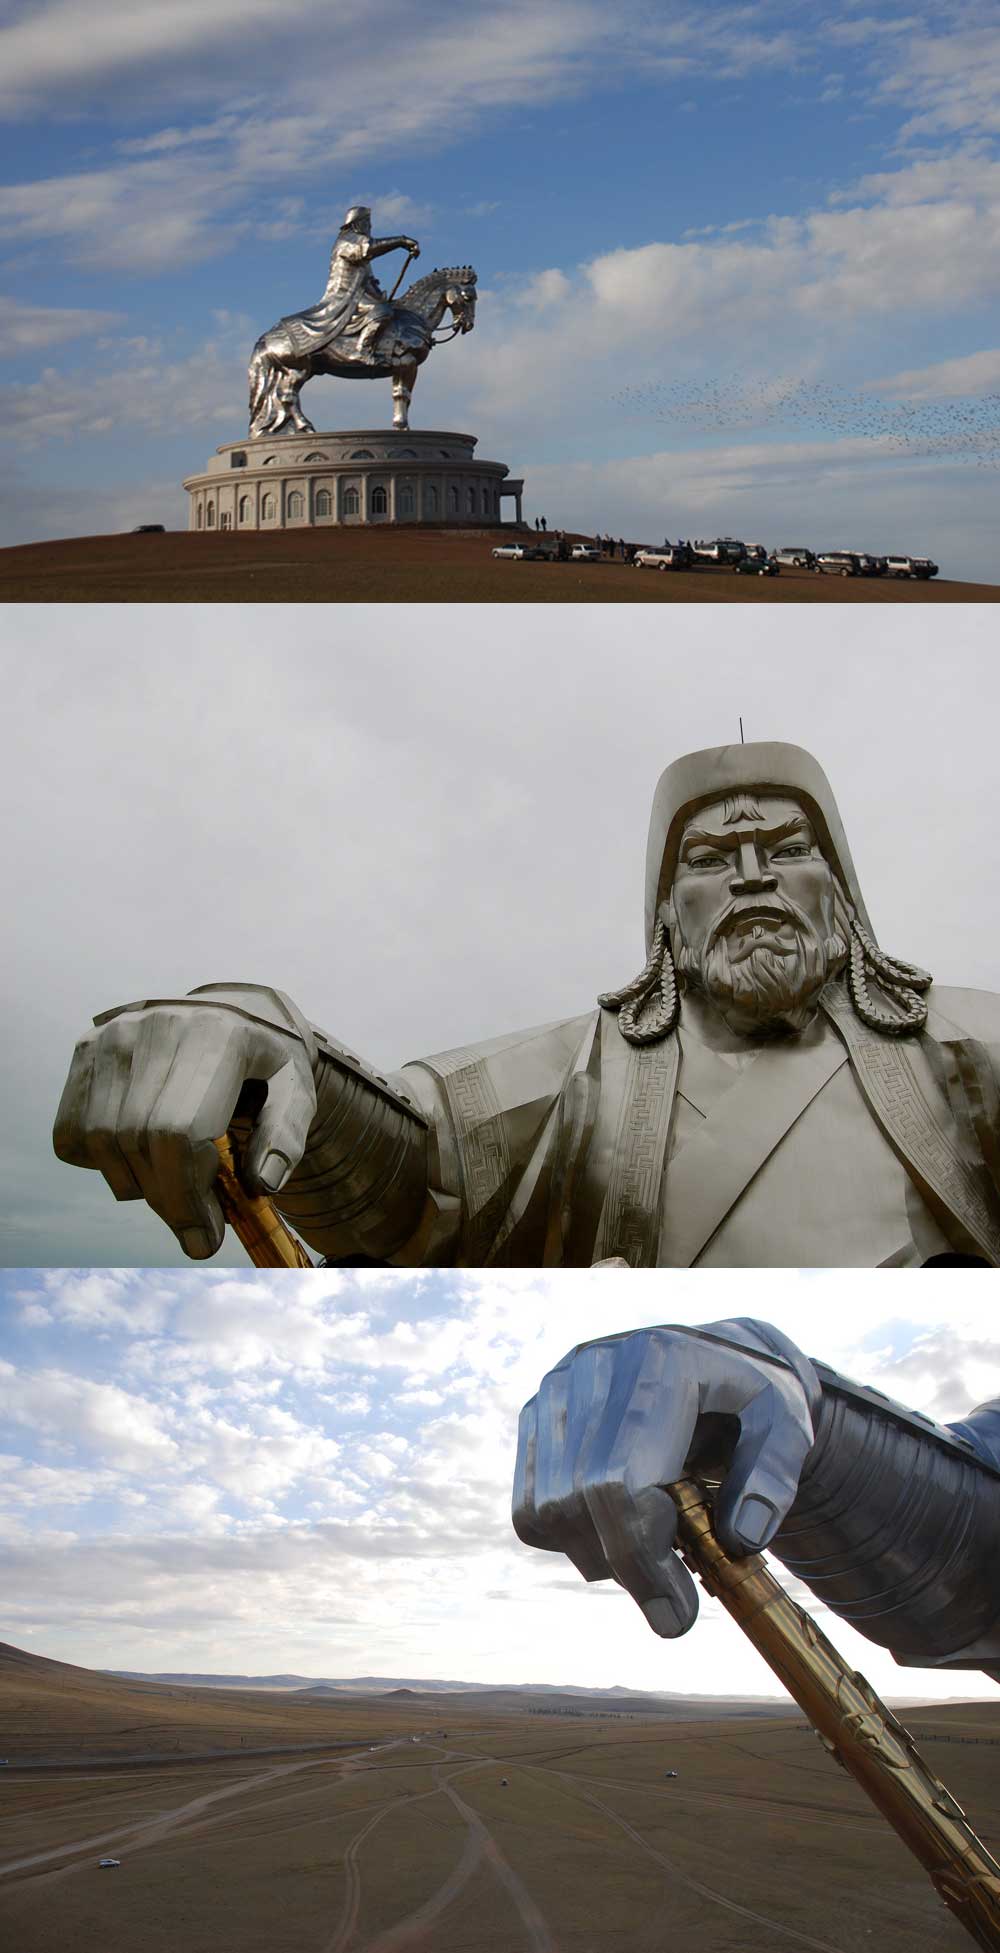 Fact: The Genghis Khan statue sits on the world's tallest statue of a horse about 54 km from Ulan Bator